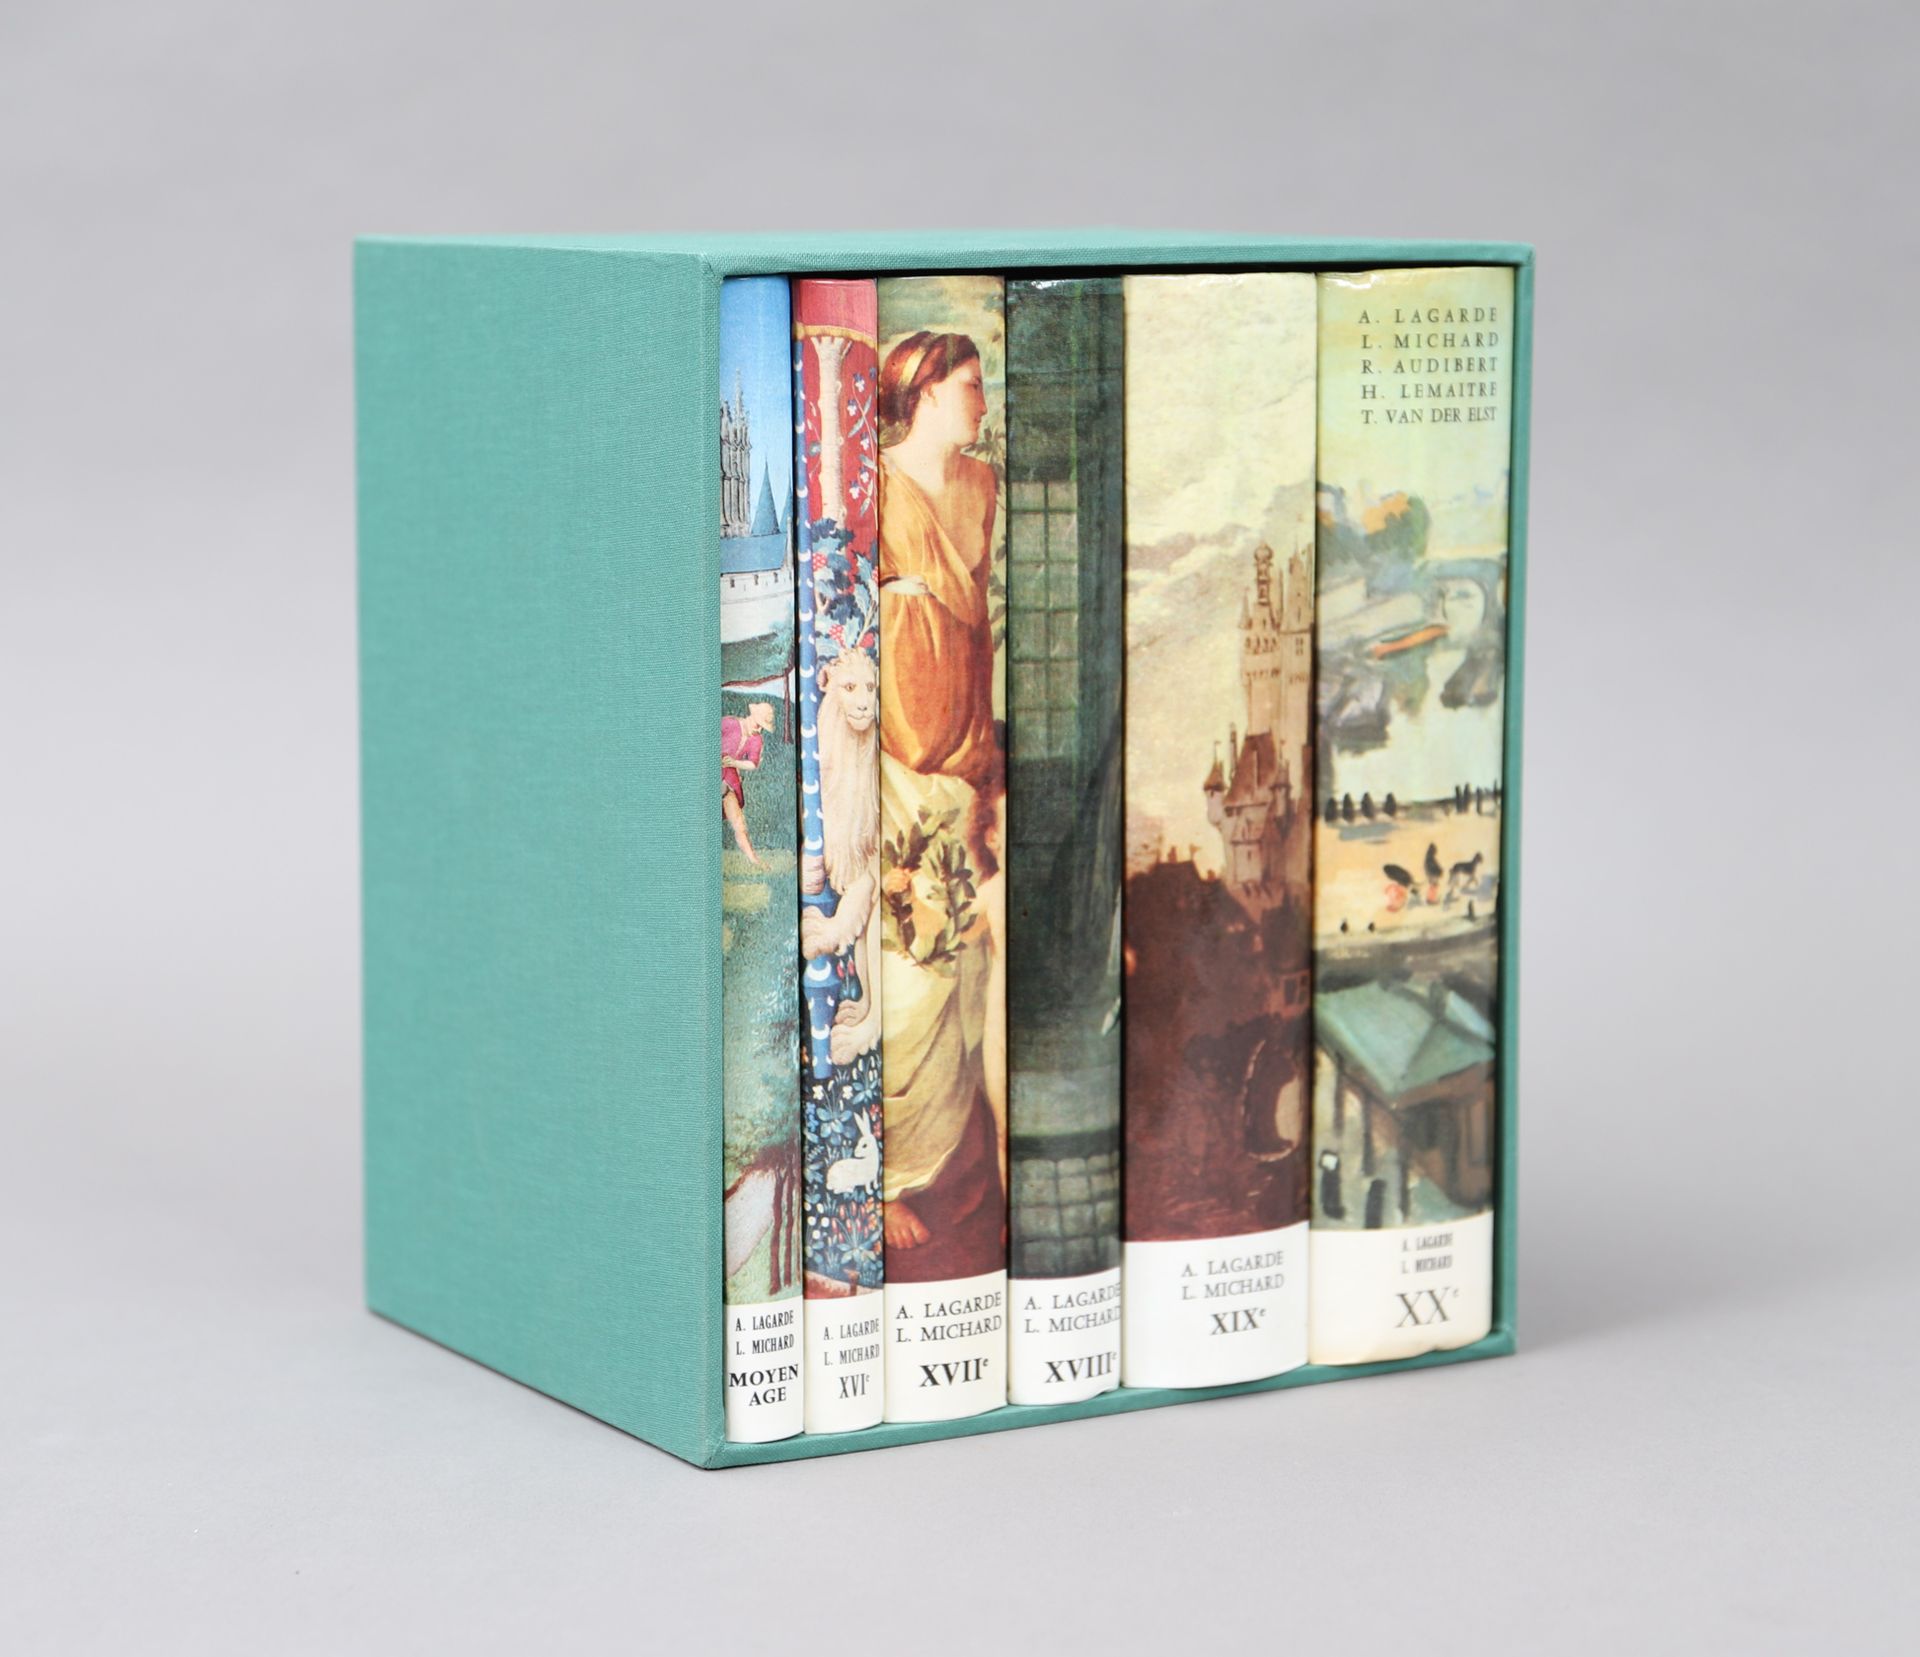 Null LAGARDE and MICHARD - HISTORY

6 volumes in slipcase.